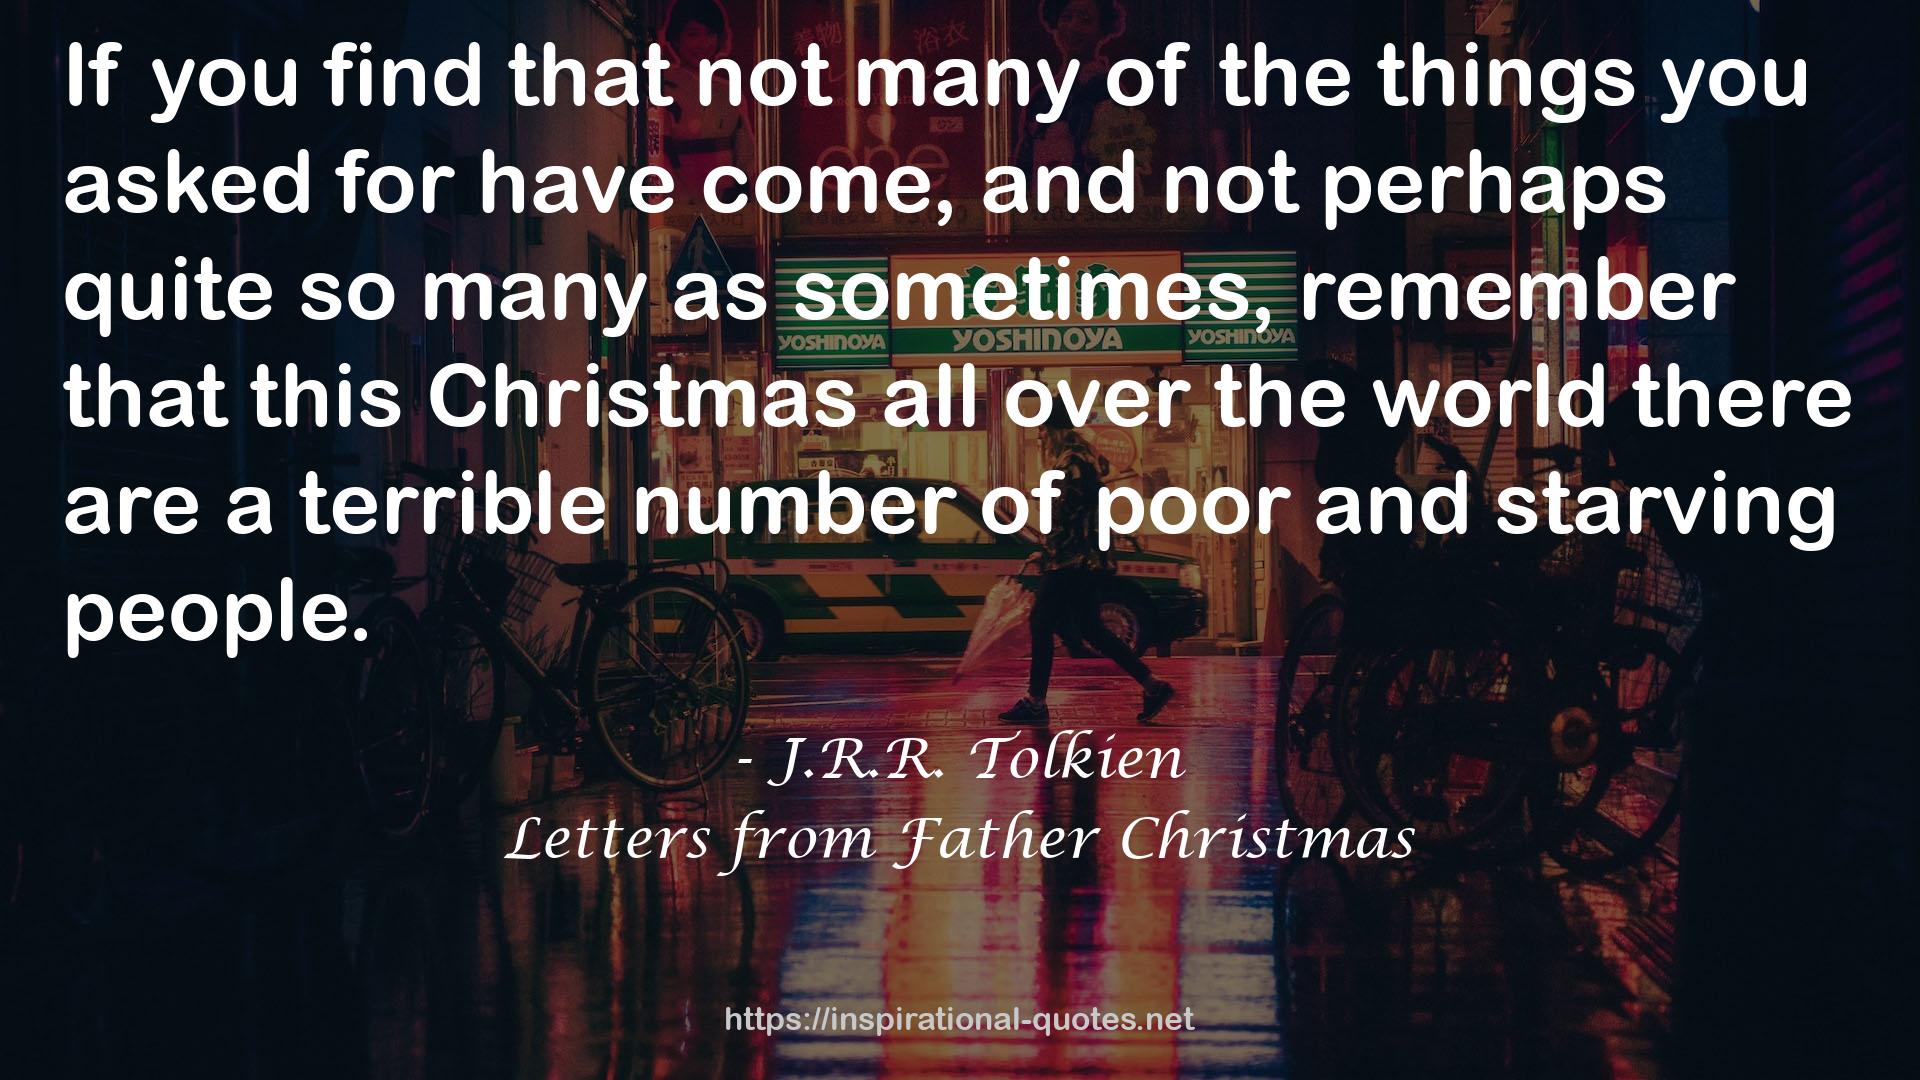 Letters from Father Christmas QUOTES